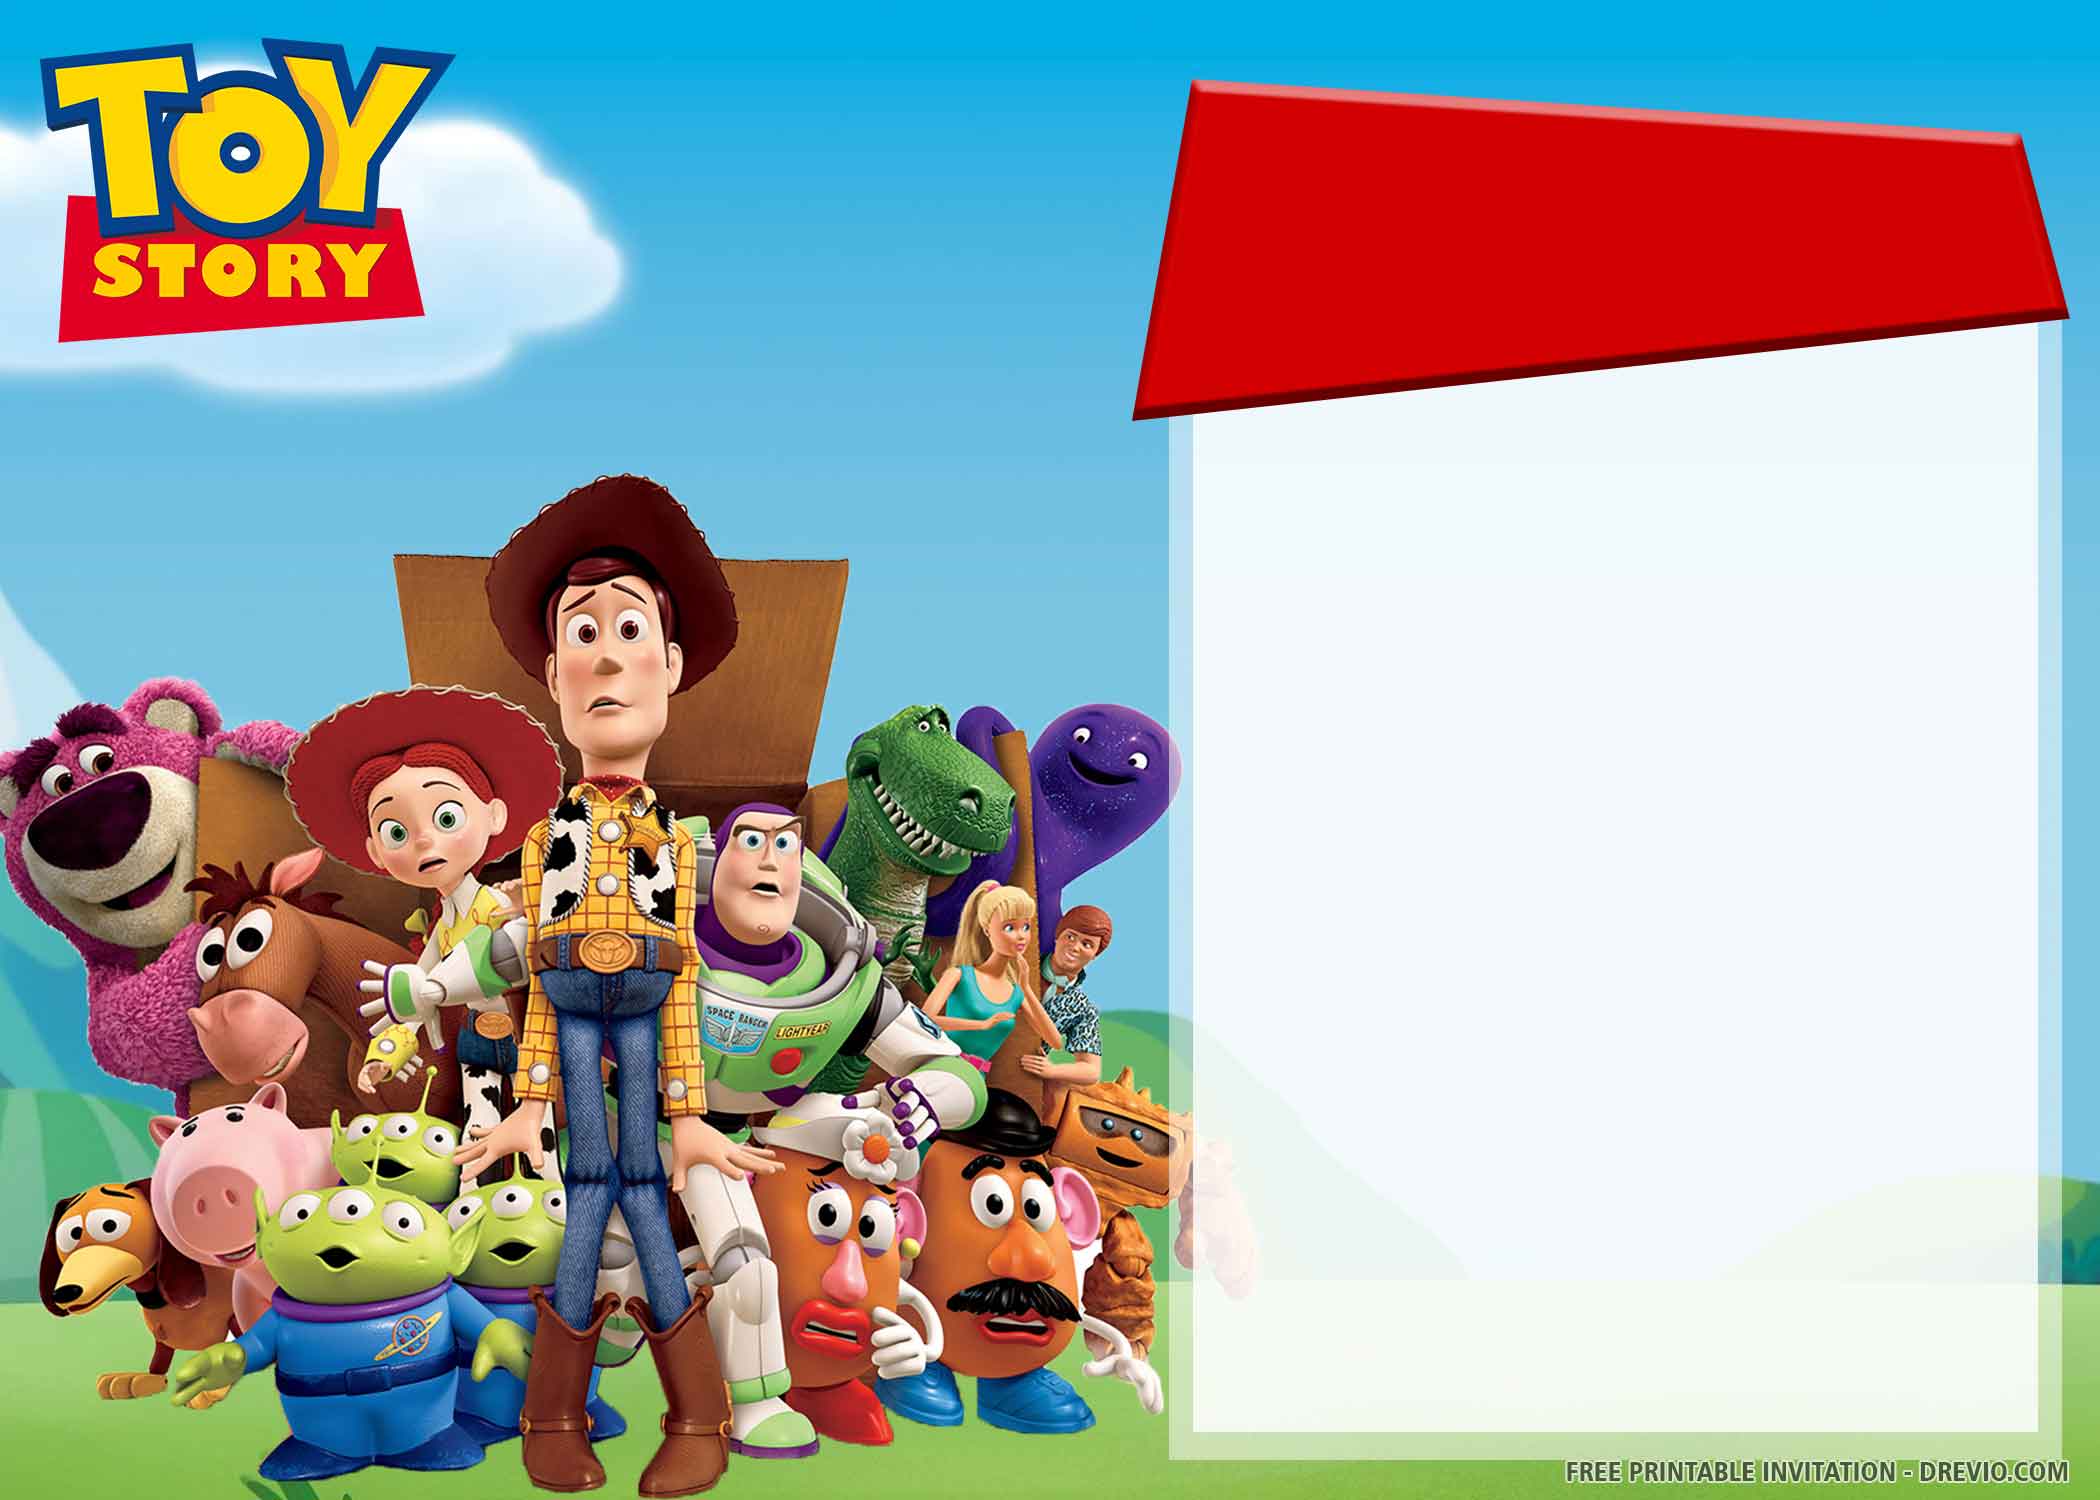  FREE PRINTABLE Toy Story 3 Birthday Invitation Templates Download 